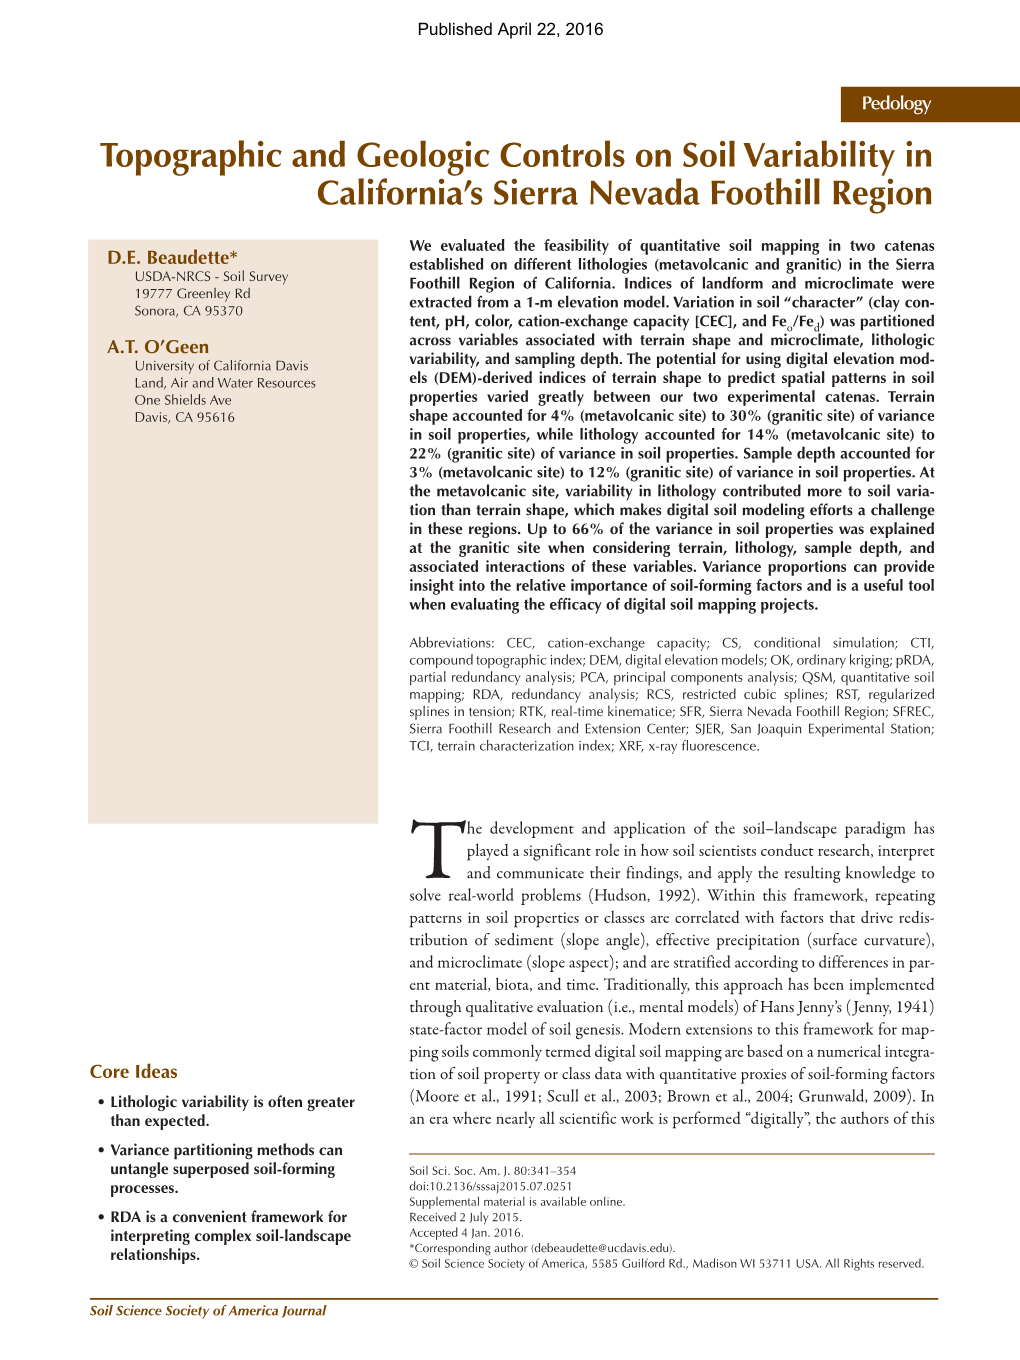 Topographic and Geologic Controls on Soil Variability in California's